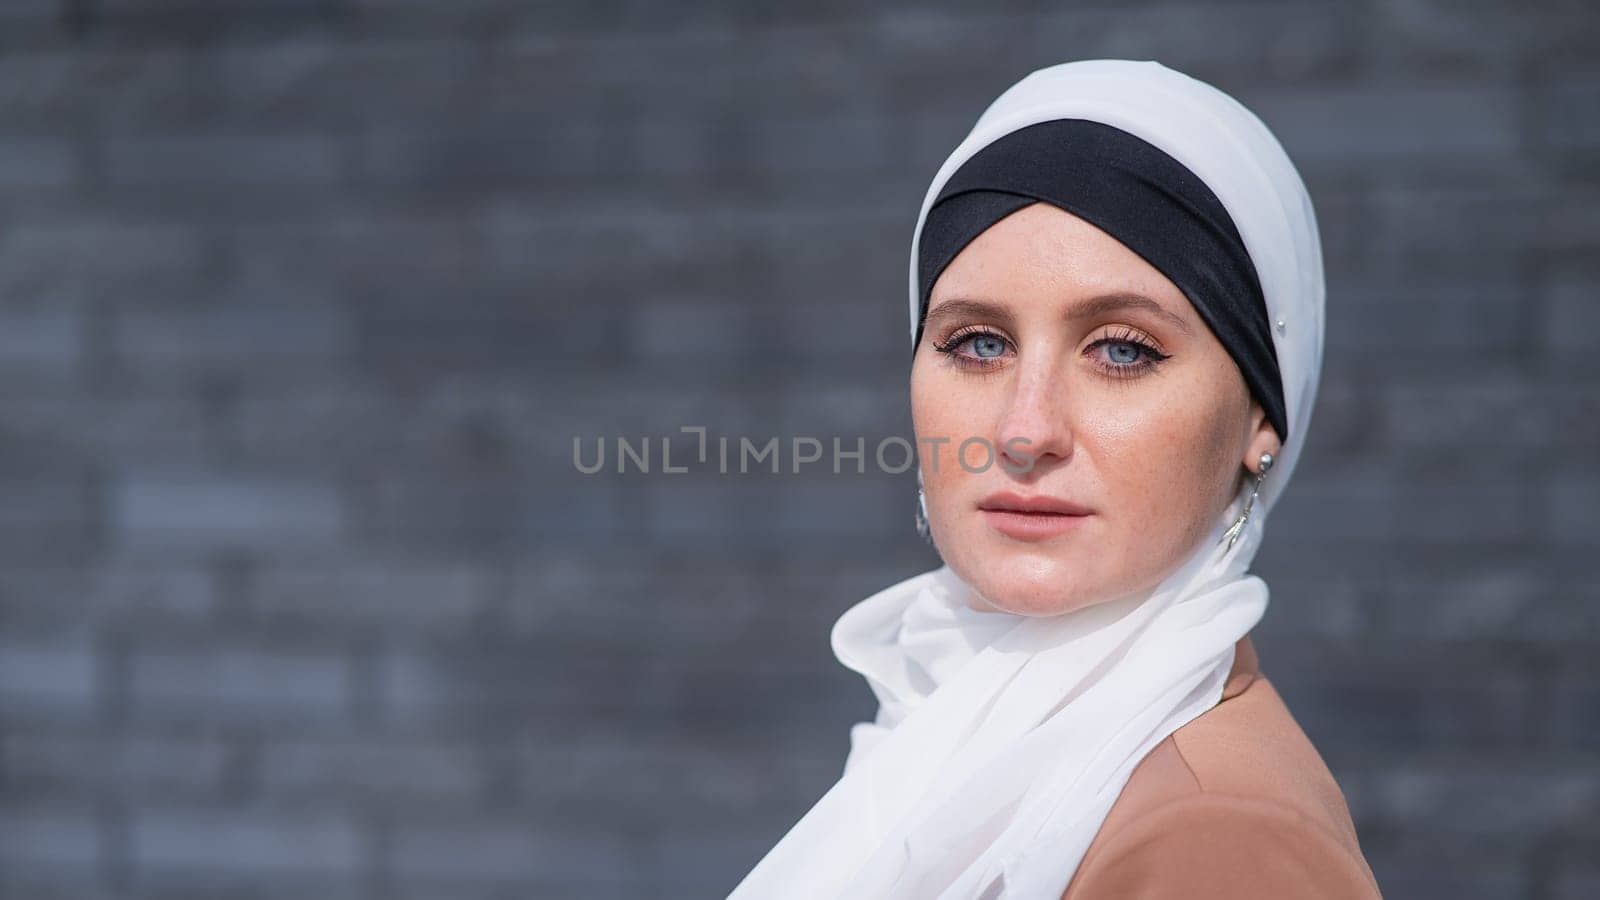 Portrait of a young blue-eyed woman in a hijab against a gray brick wall